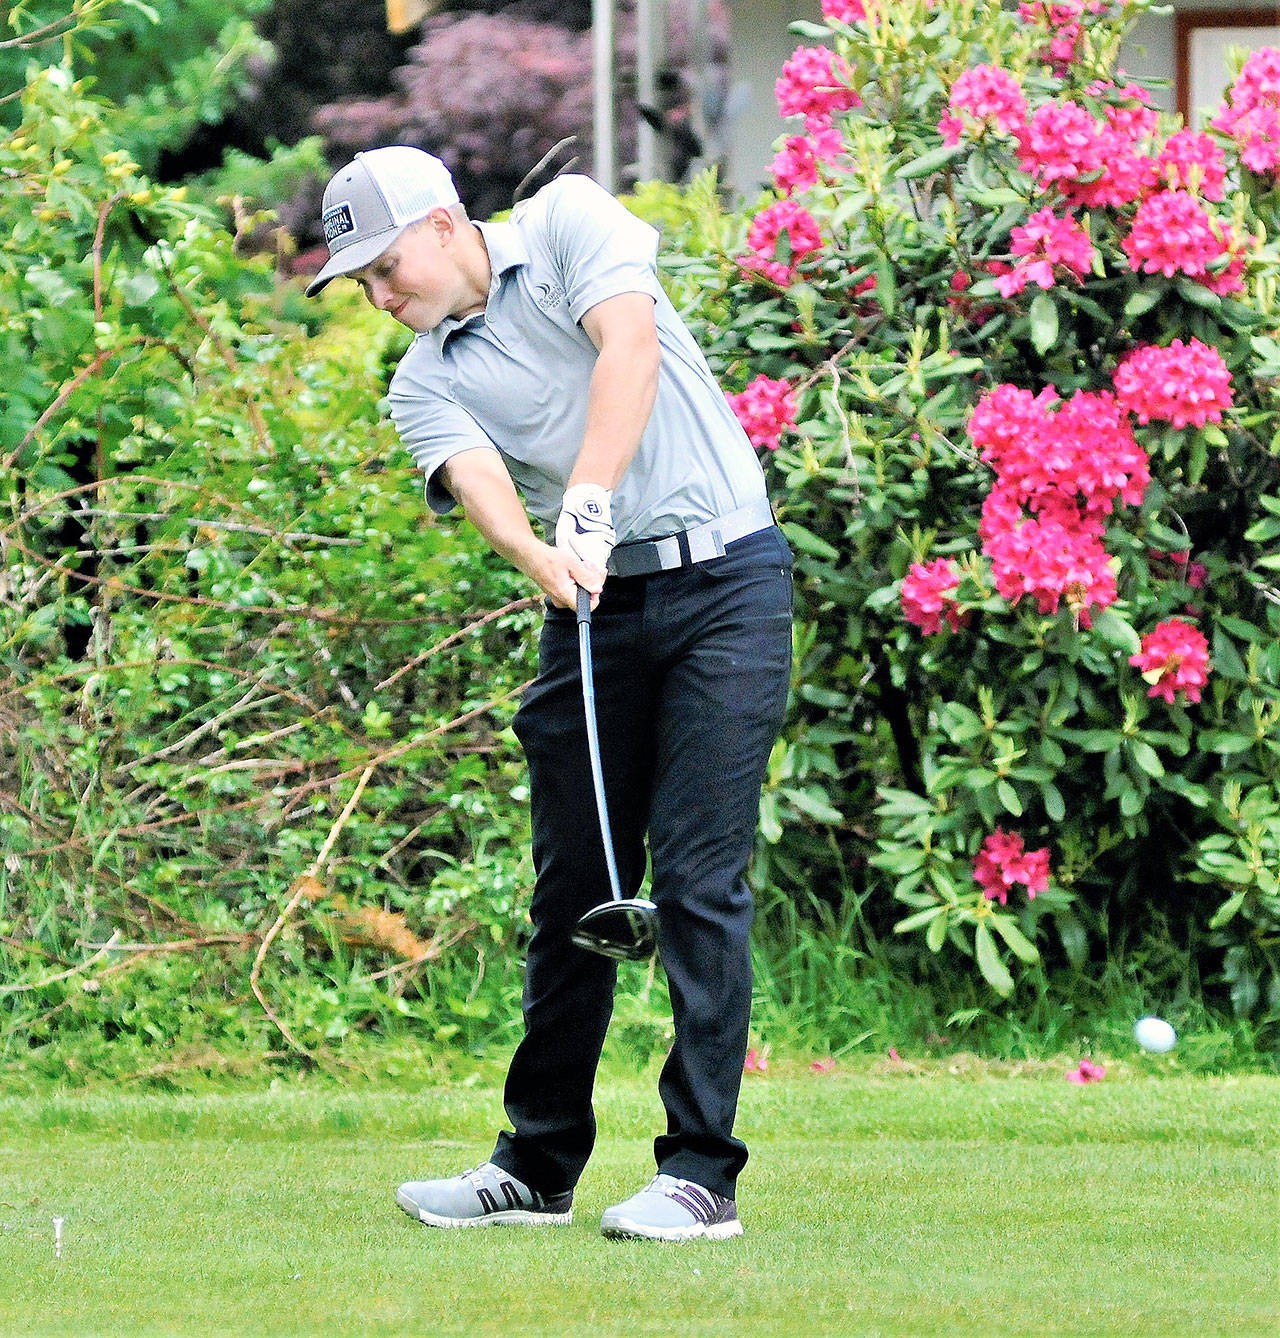 Montesano’s Payson Parker takes his tee shot from the 18th hole at Olympia Country and Golf Club during the 1A State Tournament on Thursday. Parker finished 11th with a score of 81 on day one of the tournament. (Hasani Grayson | Grays Harbor News Group)